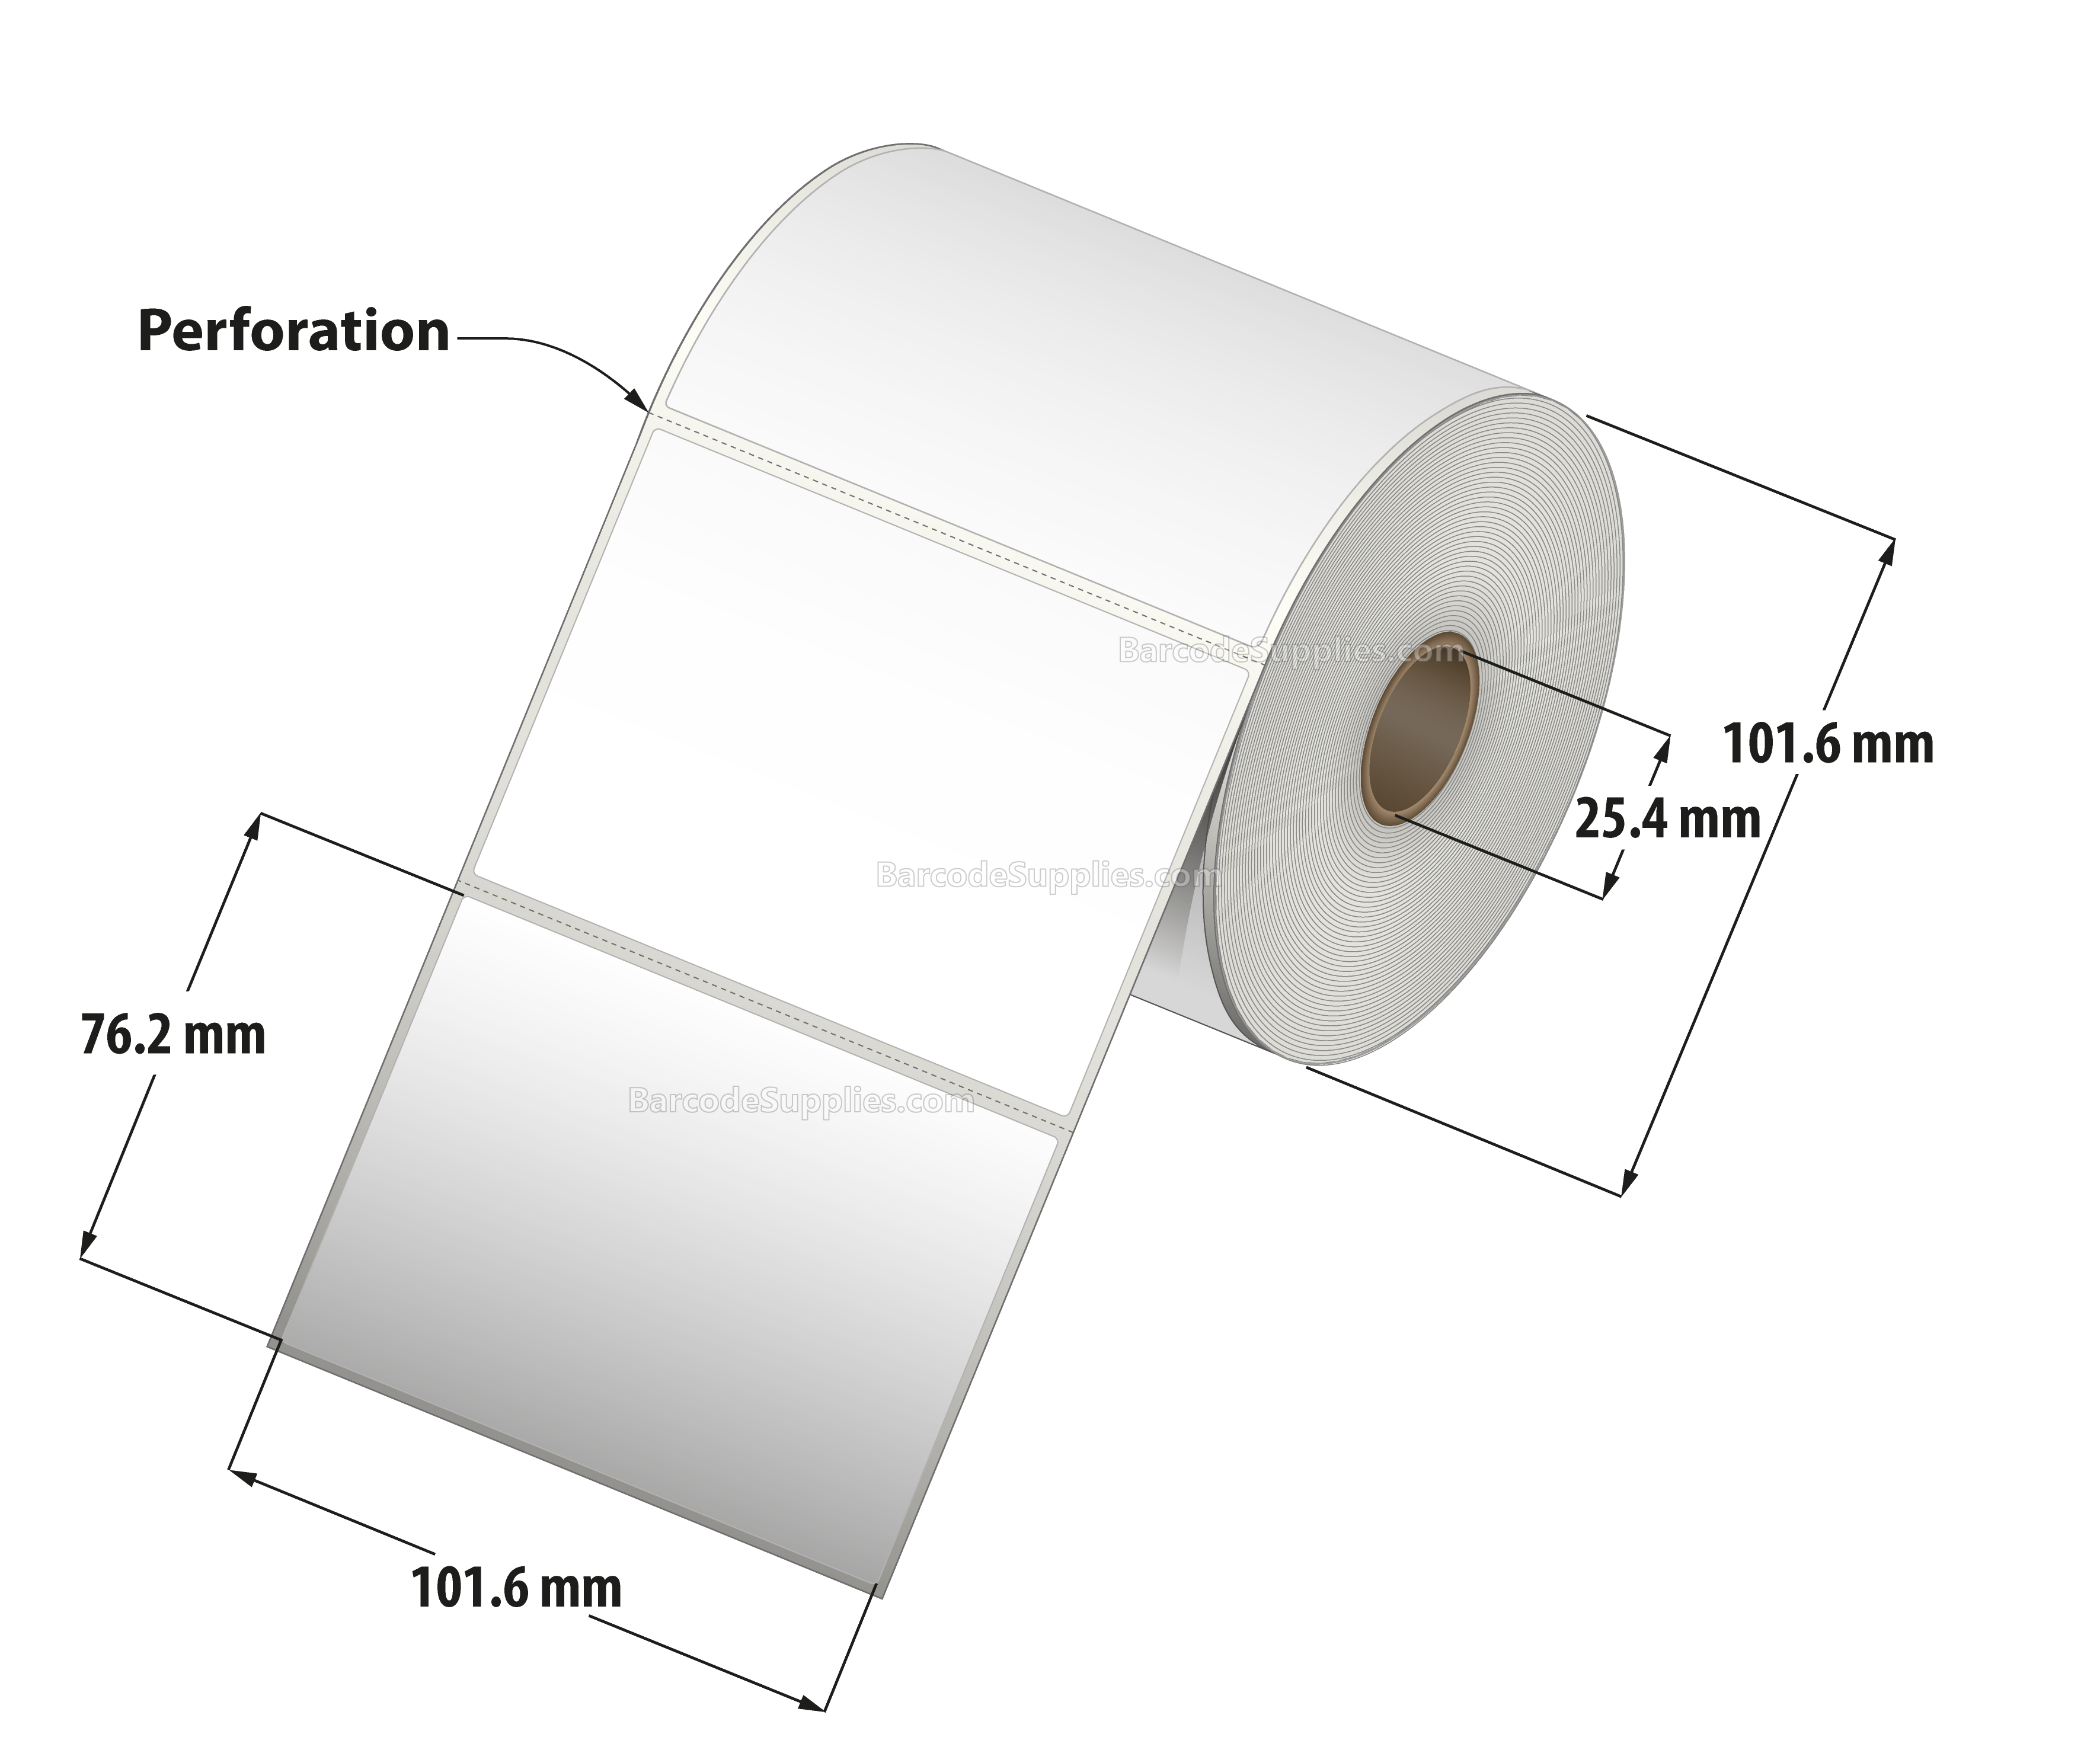 4 x 3 Direct Thermal White Labels With Acrylic Adhesive - Perforated - 500 Labels Per Roll - Carton Of 12 Rolls - 6000 Labels Total - MPN: RD-4-3-500-1 - BarcodeSource, Inc.